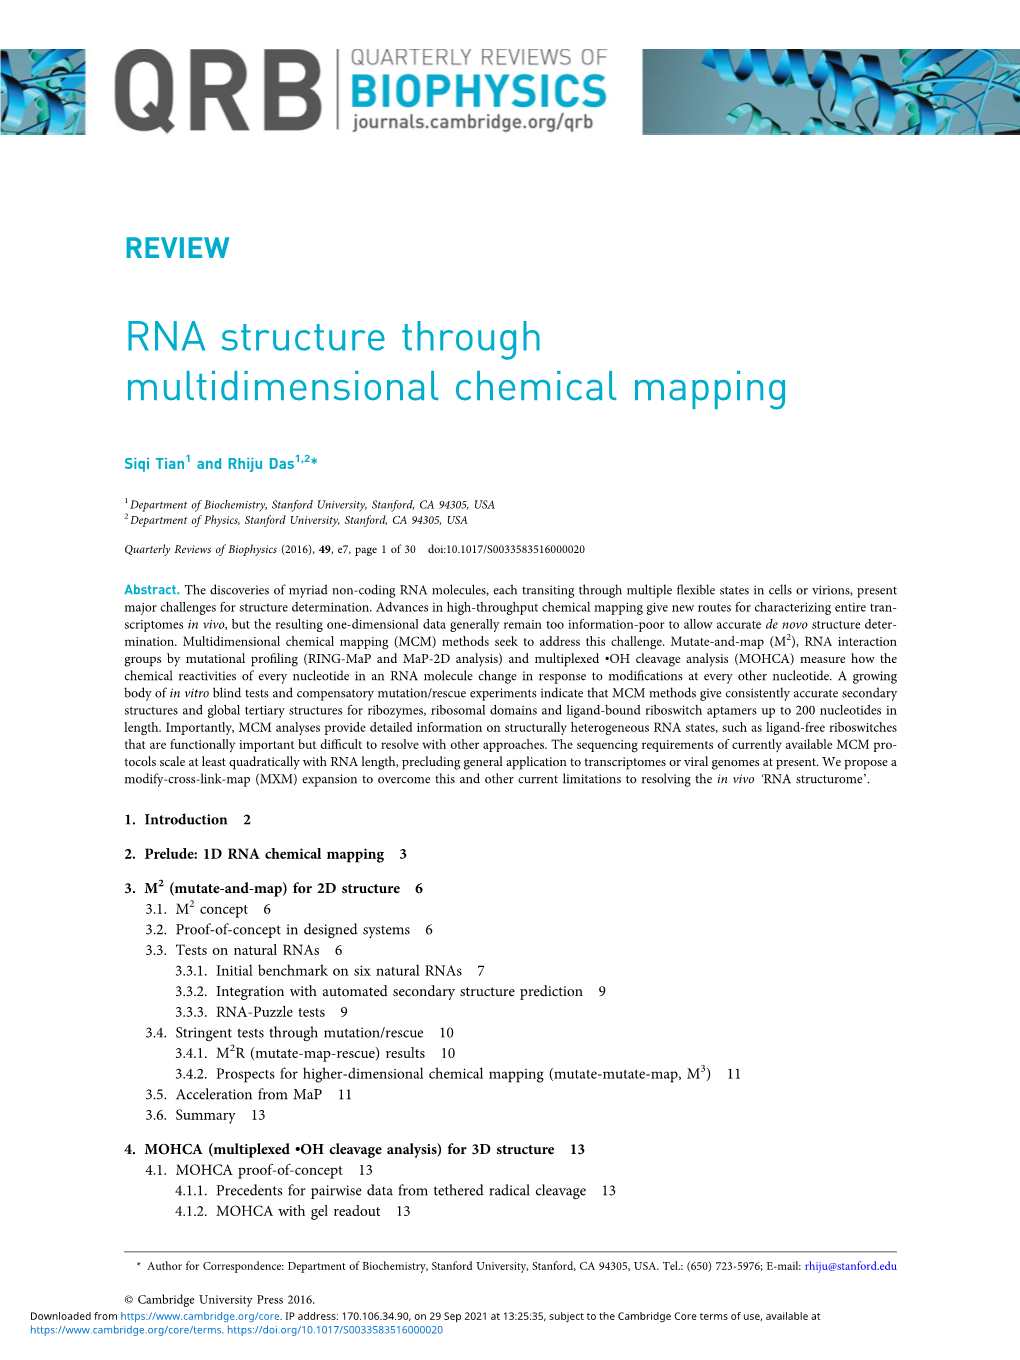 RNA Structure Through Multidimensional Chemical Mapping